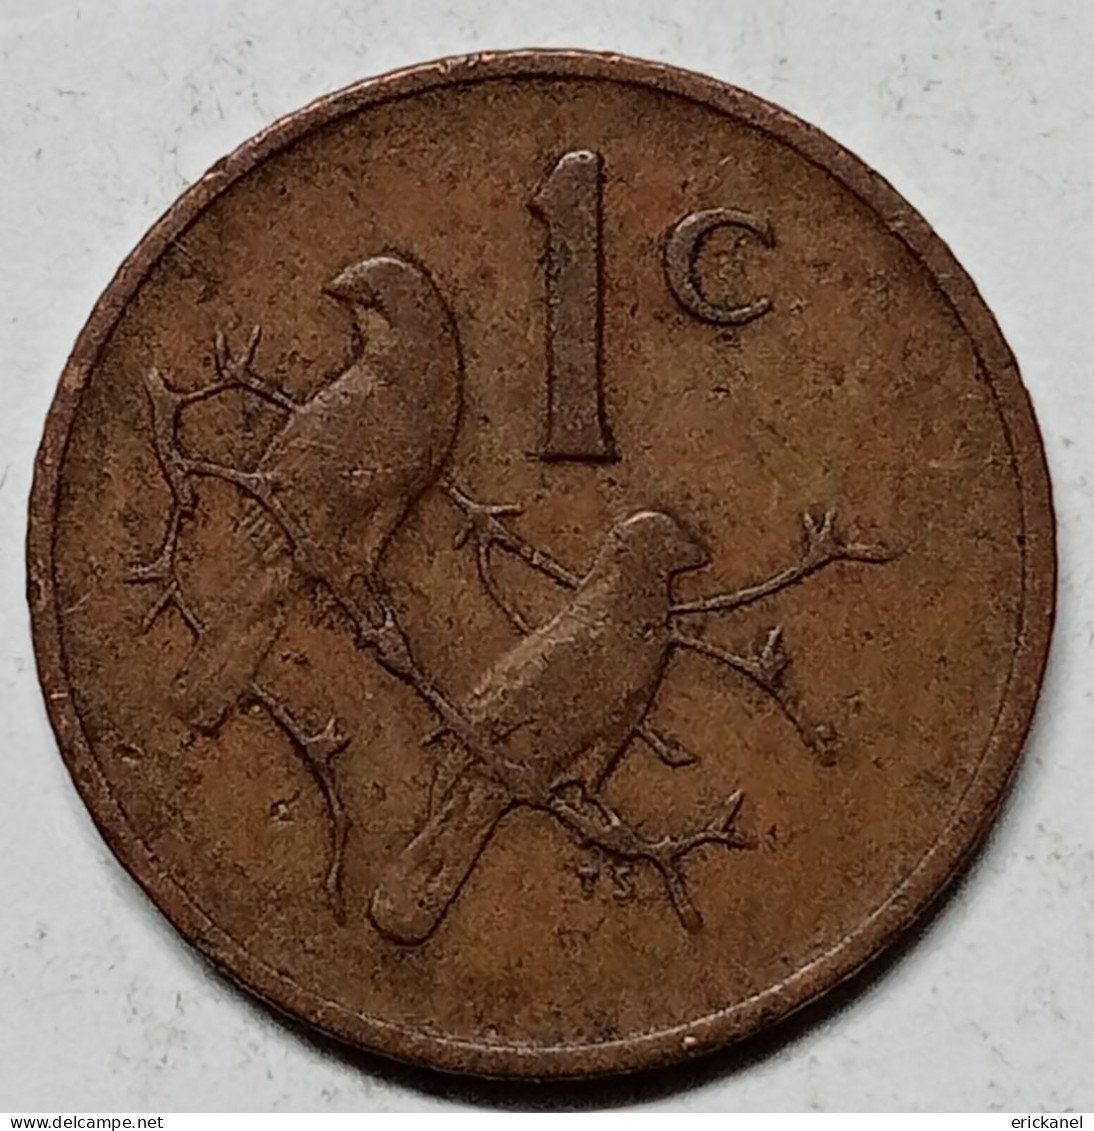 SOUTH AFRICA 1974 1 CENT - South Africa